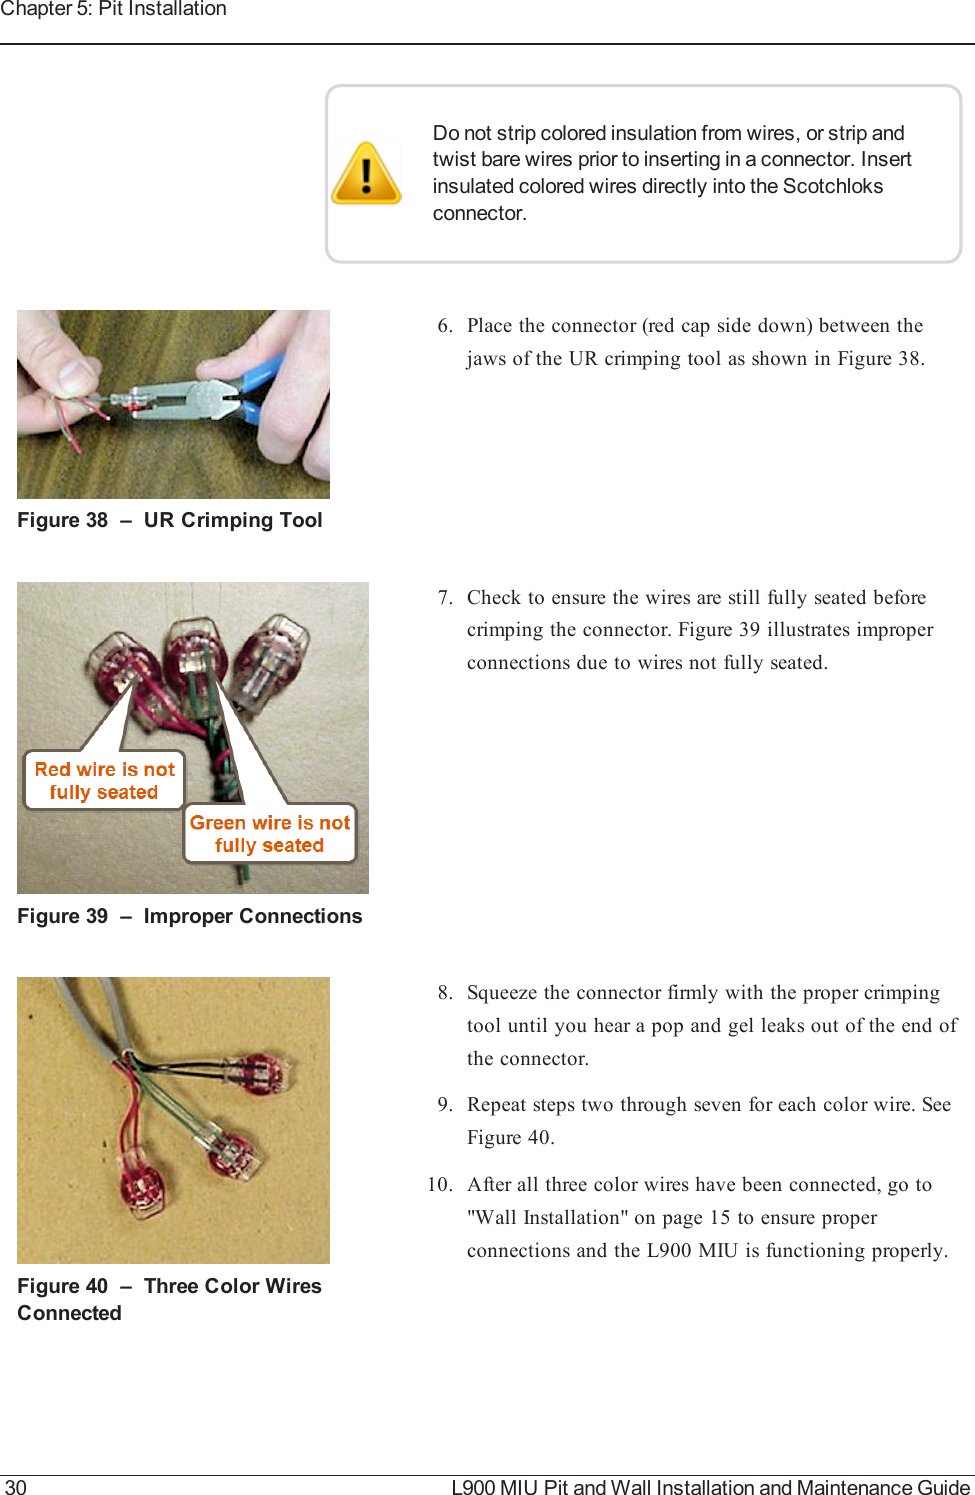 Do not strip colored insulation from wires, or strip andtwist bare wires prior to inserting in a connector. Insertinsulated colored wires directly into the Scotchloksconnector.Figure 38 – URCrimping Tool6. Place the connector (red cap side down) between thejaws of the UR crimping tool as shown in Figure 38.Figure 39 – Improper Connections7. Check to ensure the wires are still fully seated beforecrimping the connector. Figure 39 illustrates improperconnections due to wires not fully seated.Figure 40 – Three Color WiresConnected8. Squeeze the connector firmly with the proper crimpingtool until you hear a pop and gel leaks out of the end ofthe connector.9. Repeat steps two through seven for each color wire. SeeFigure 40.10. After all three color wires have been connected, go to&quot;Wall Installation&quot; on page15 to ensure properconnections and the L900 MIU is functioning properly.30 L900 MIU Pit and Wall Installation and Maintenance GuideChapter 5: Pit Installation